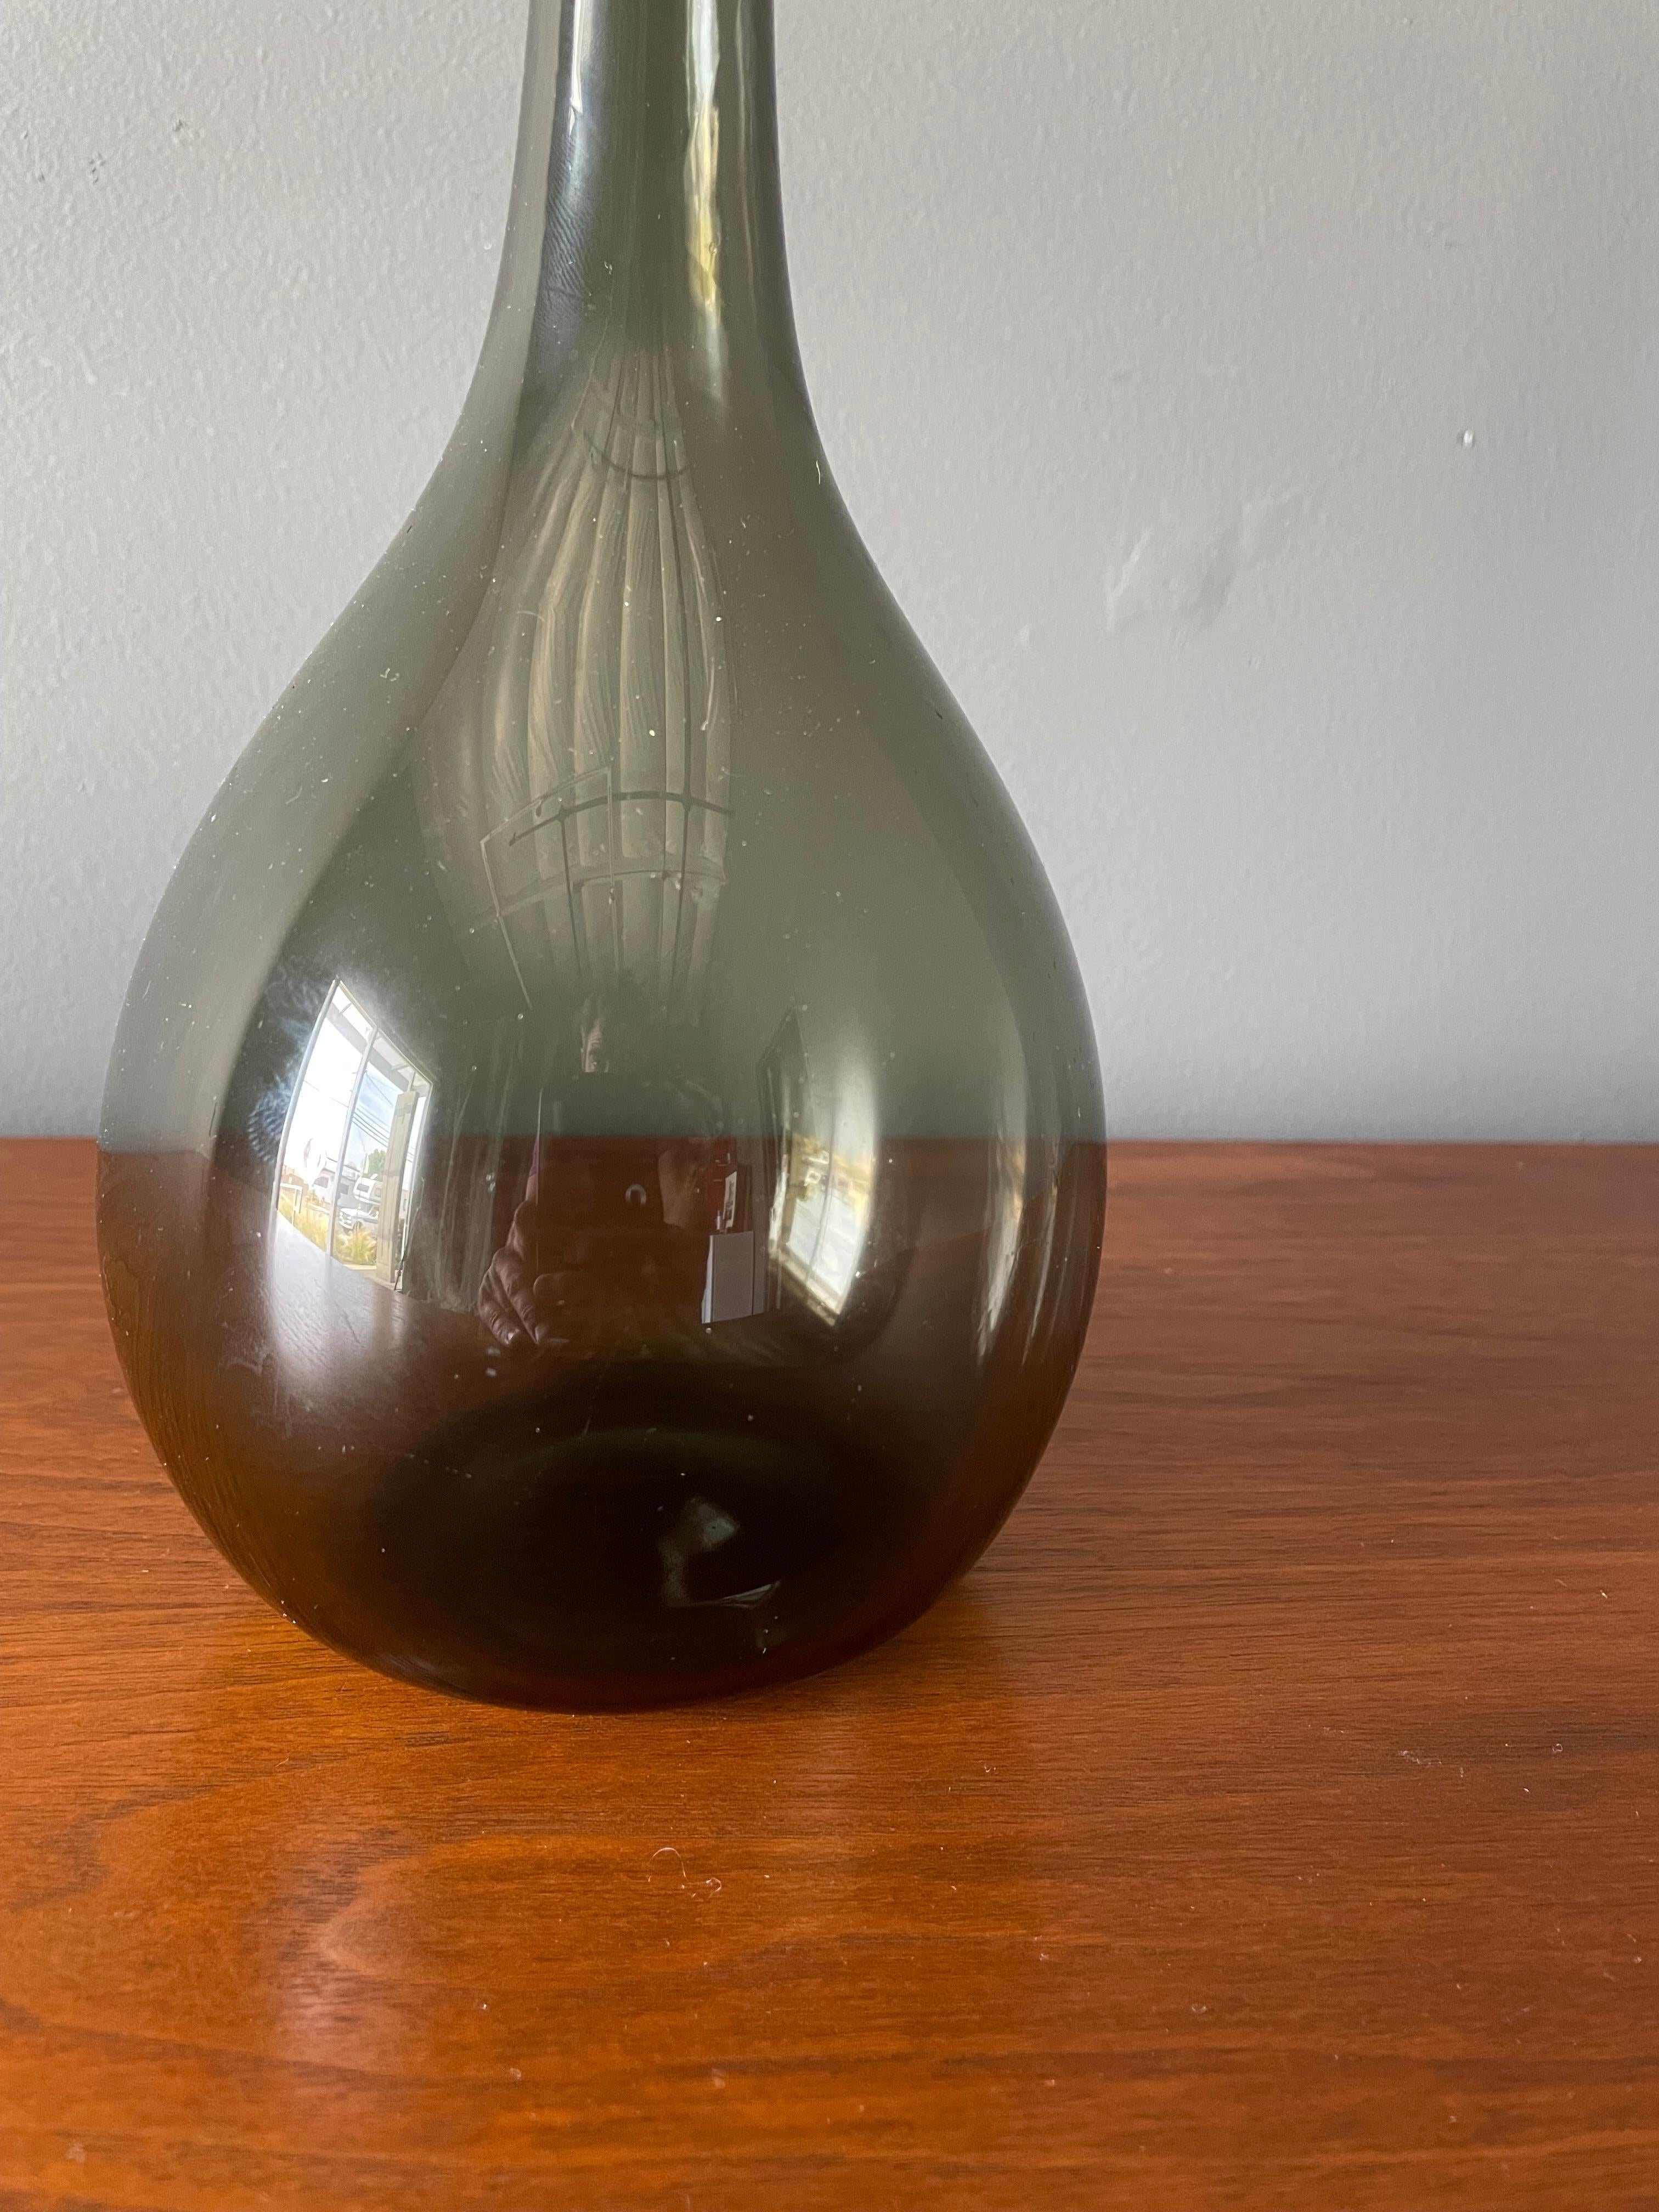 Vintage art glass vase. Circa 1960's. Slender and elegant design. A wonderful accent piece for any home.